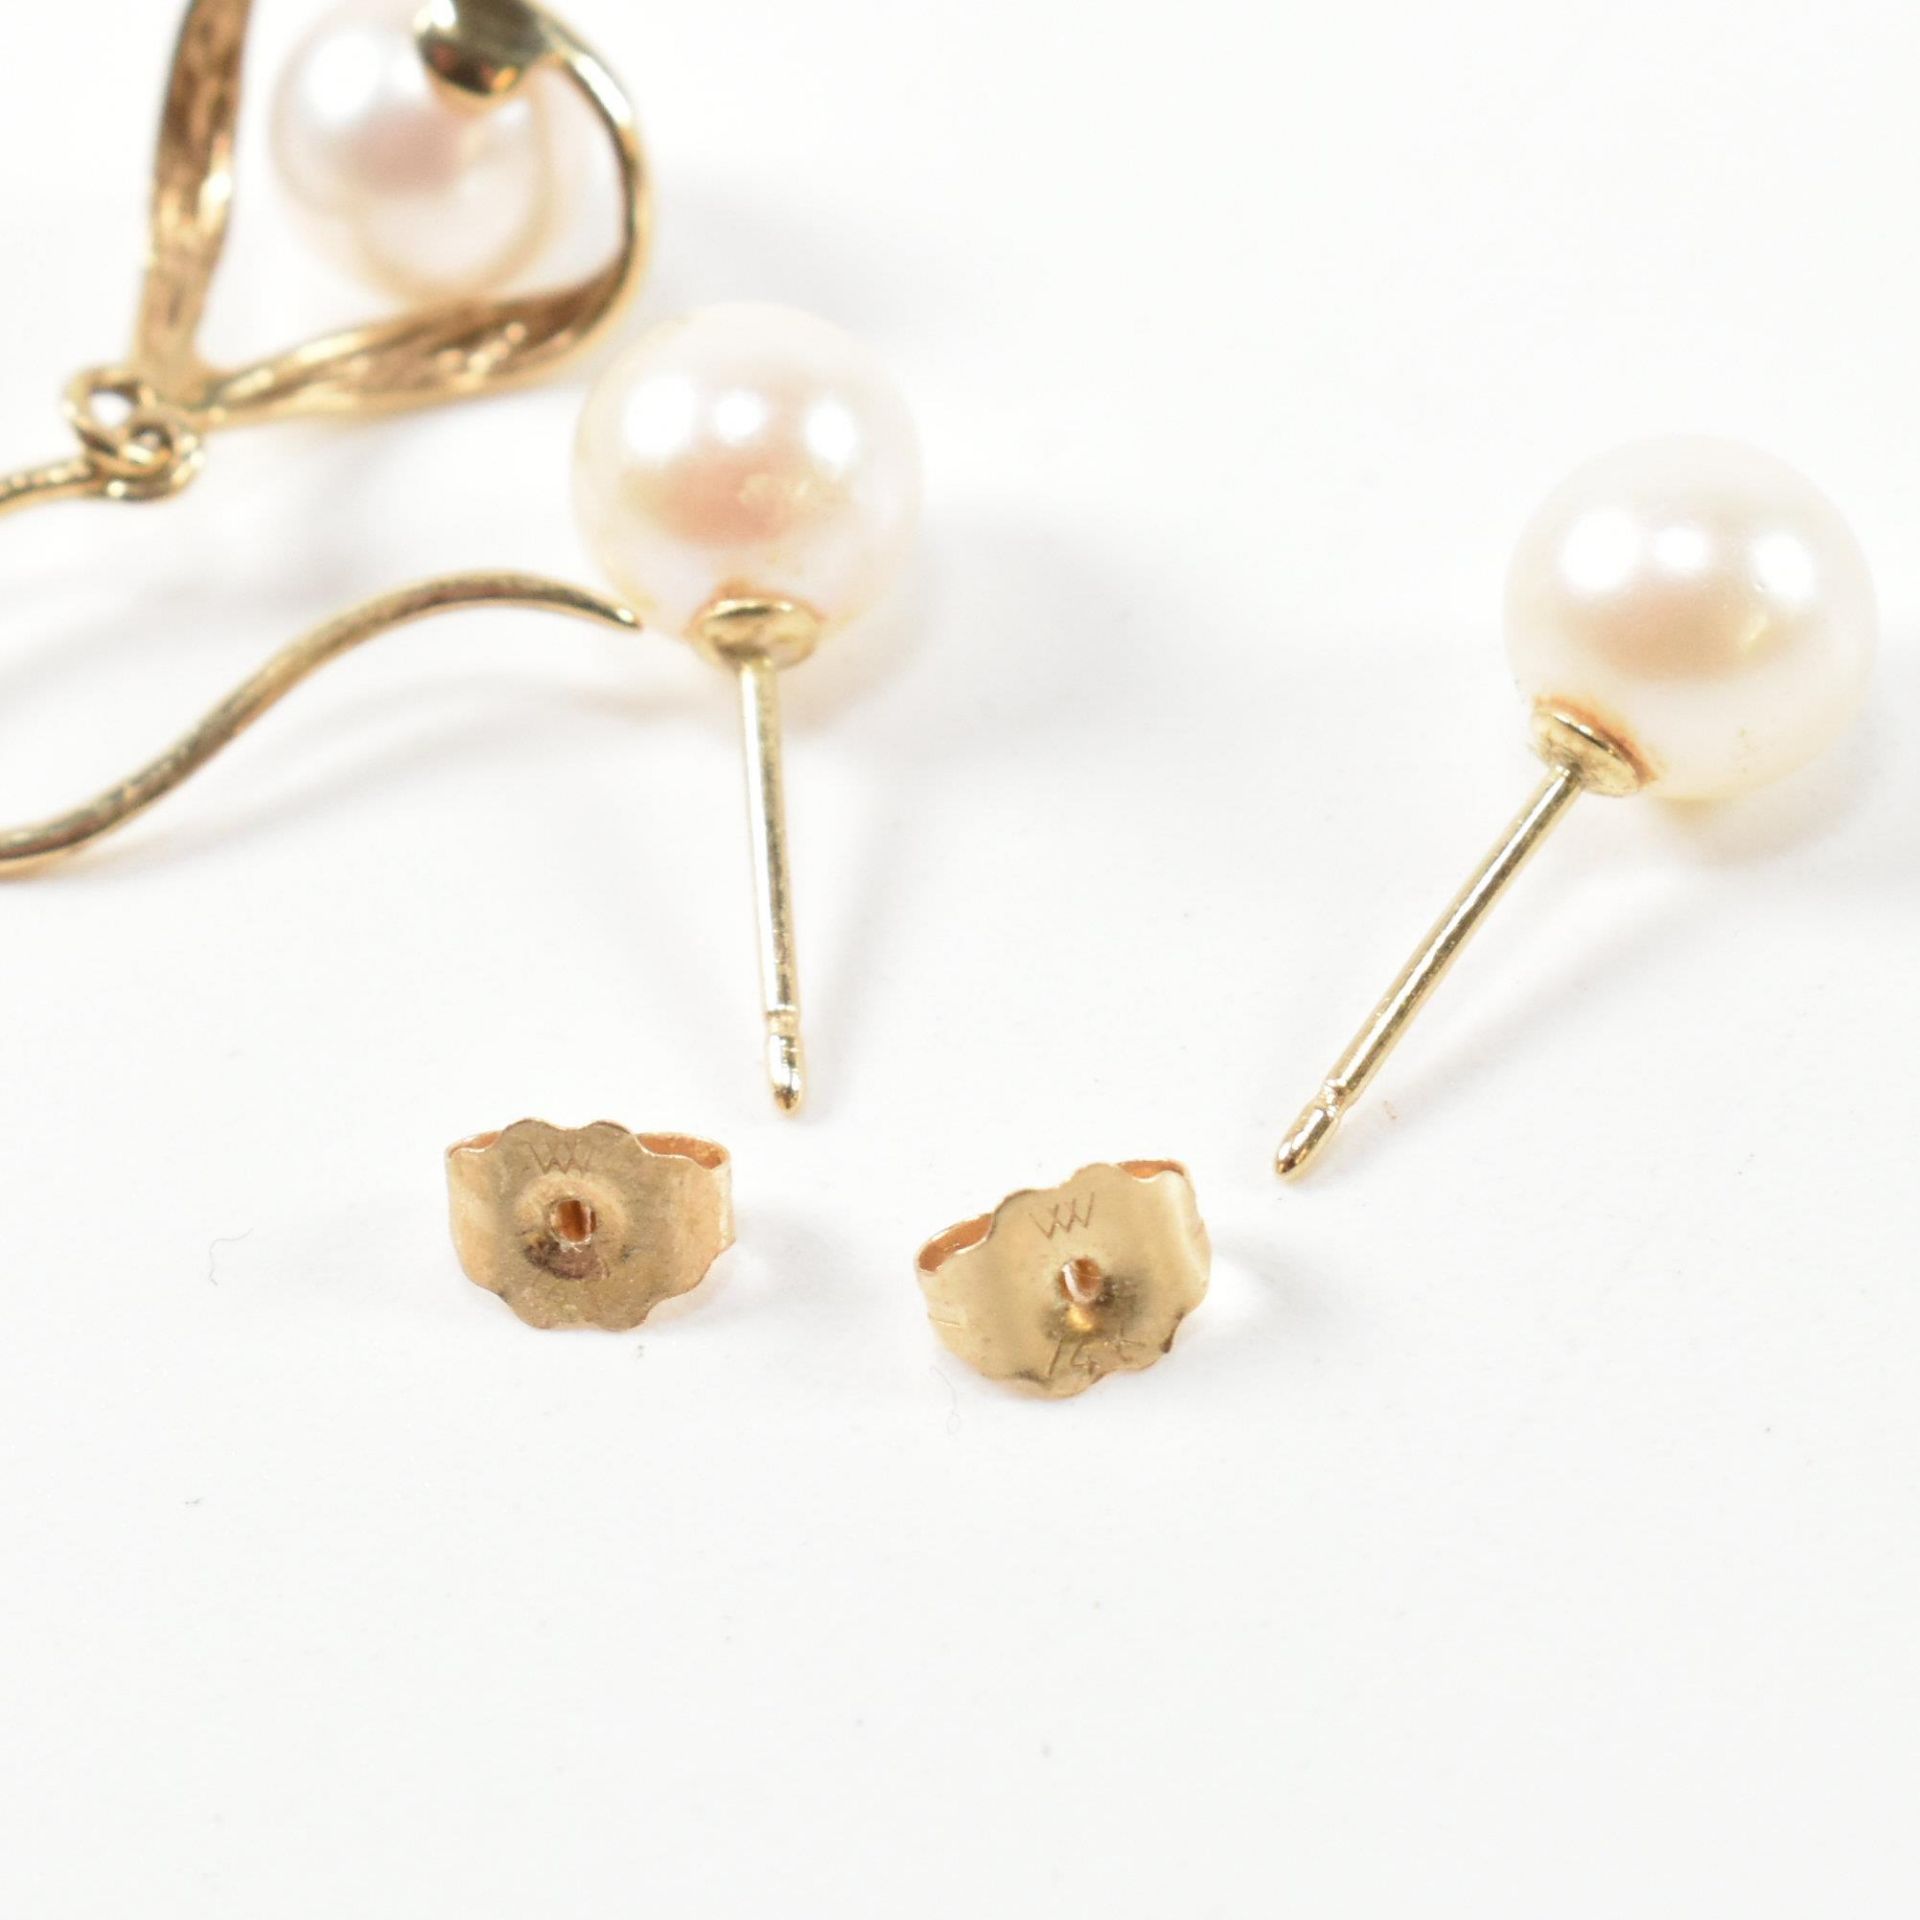 TWO PAIRS OF GOLD & CULTURED PEARL EARRINGS - Image 5 of 6